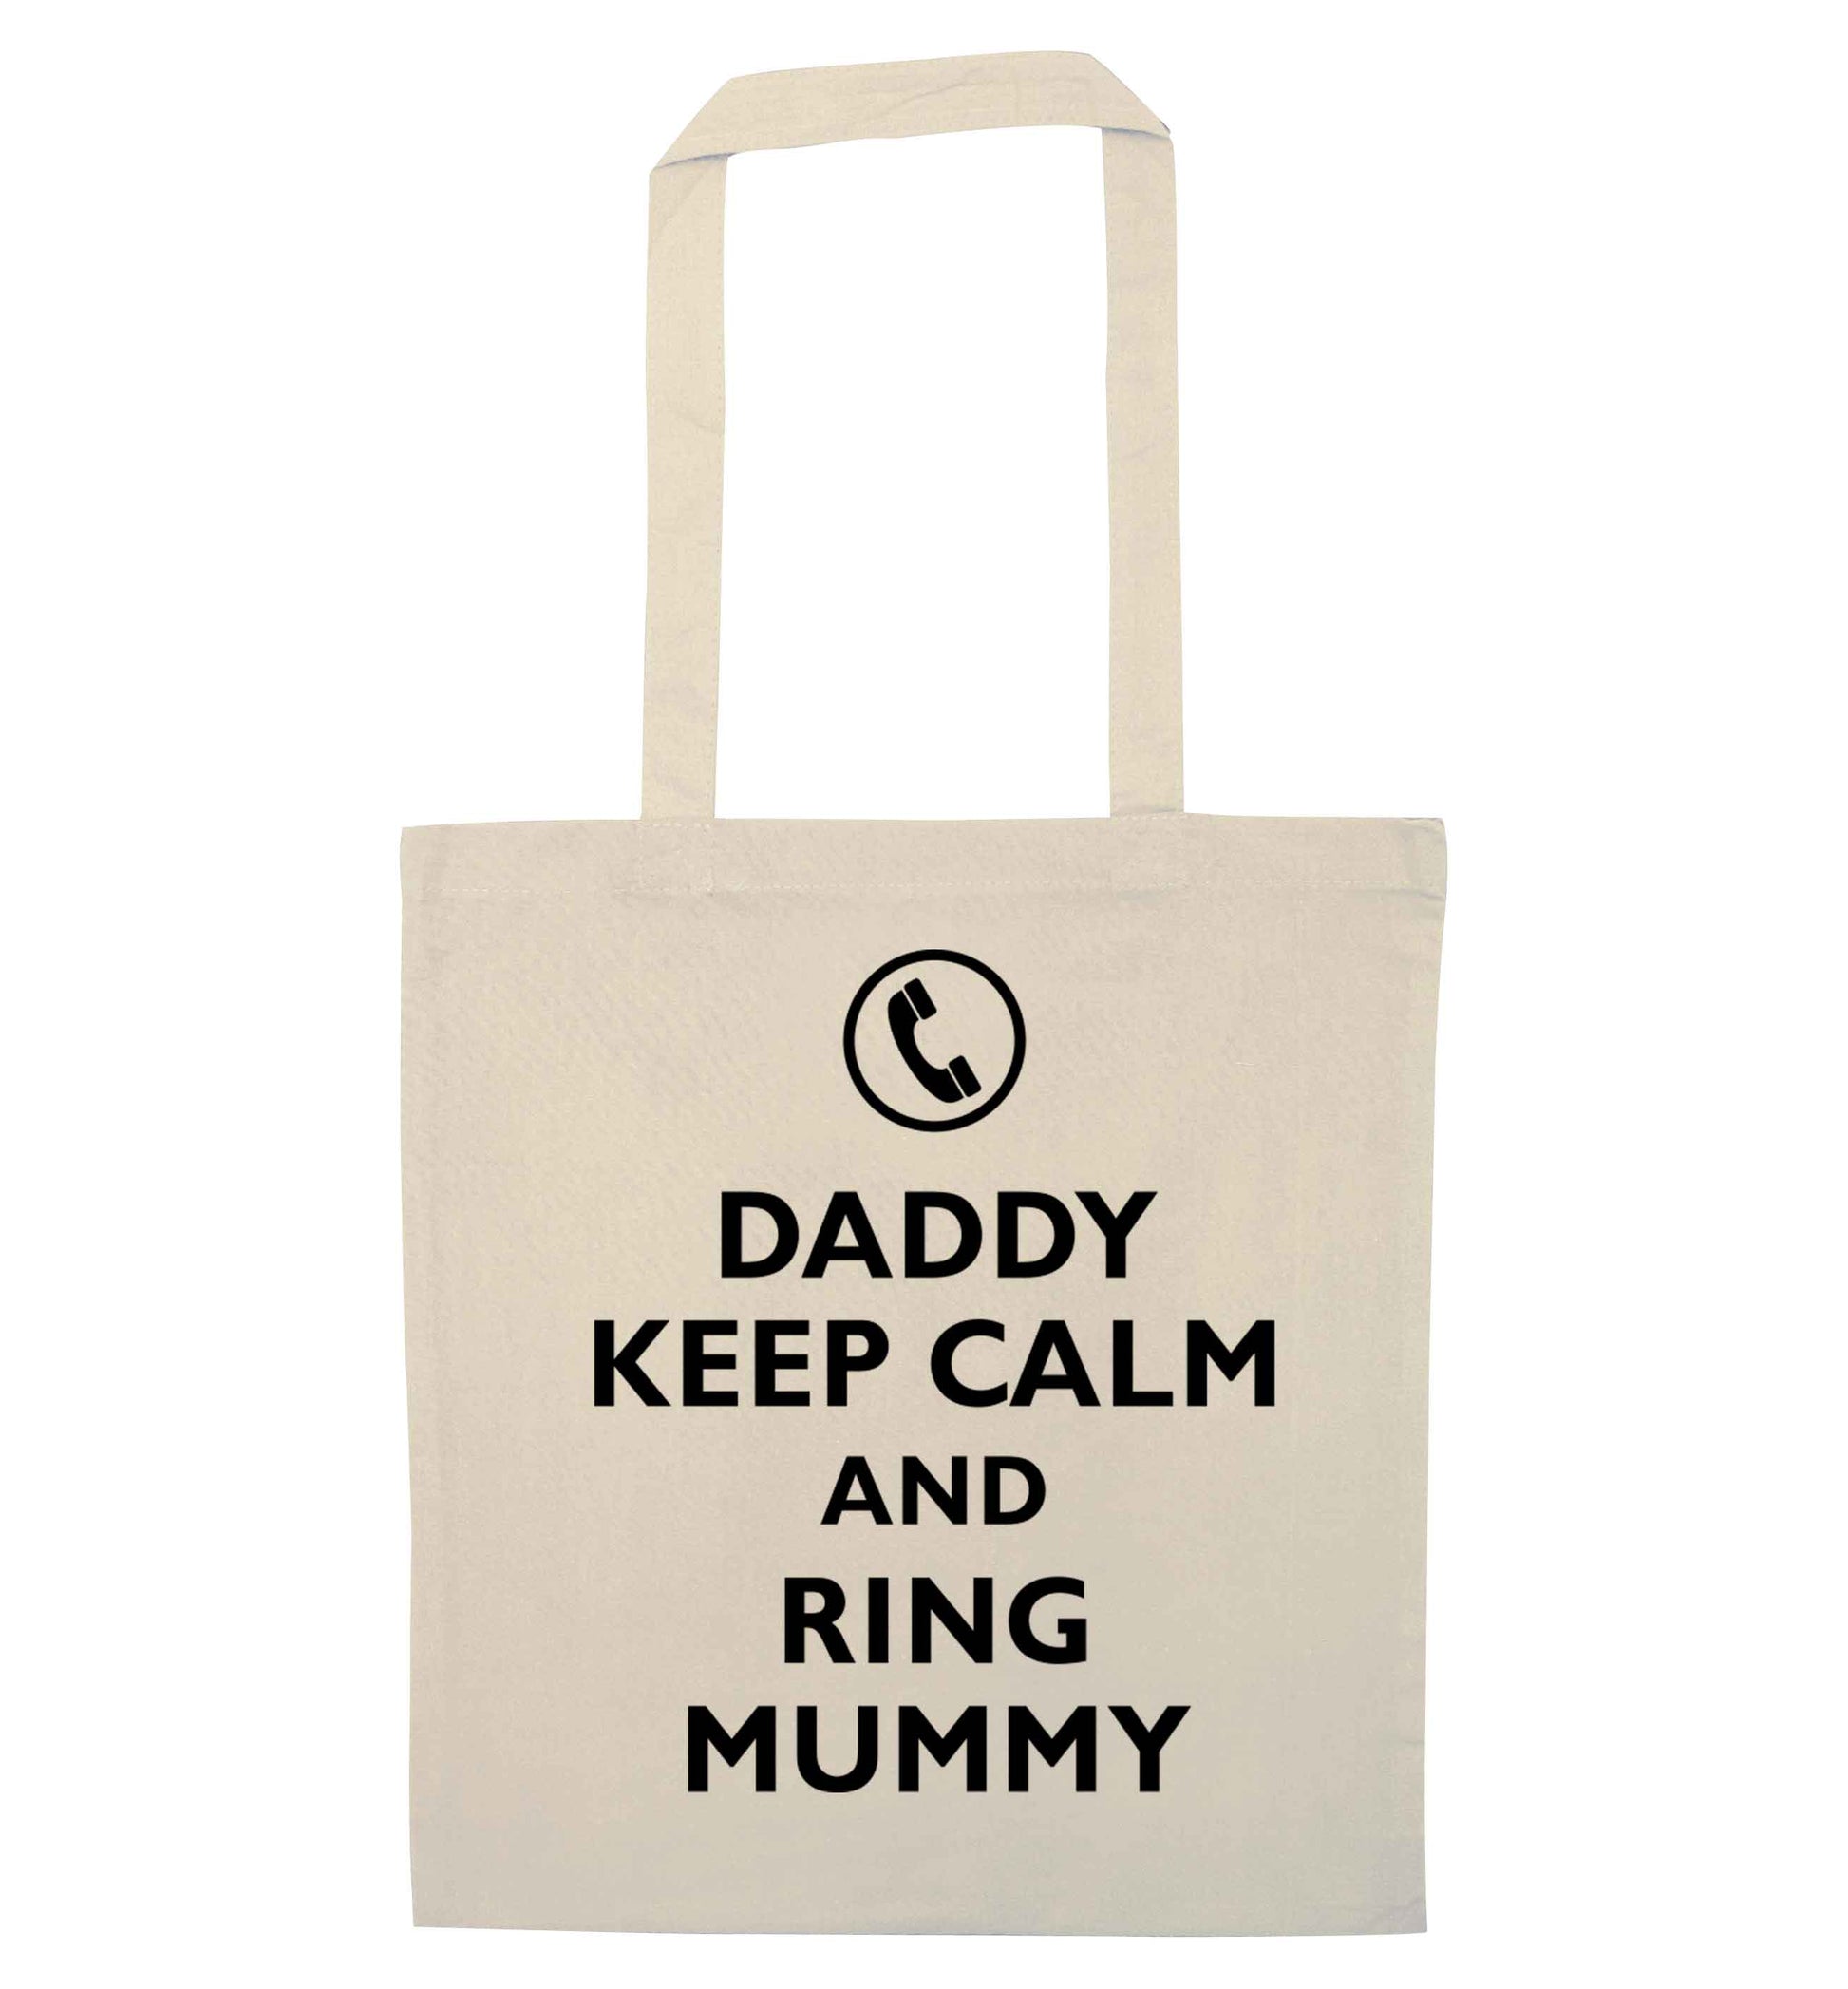 Daddy keep calm and ring mummy natural tote bag